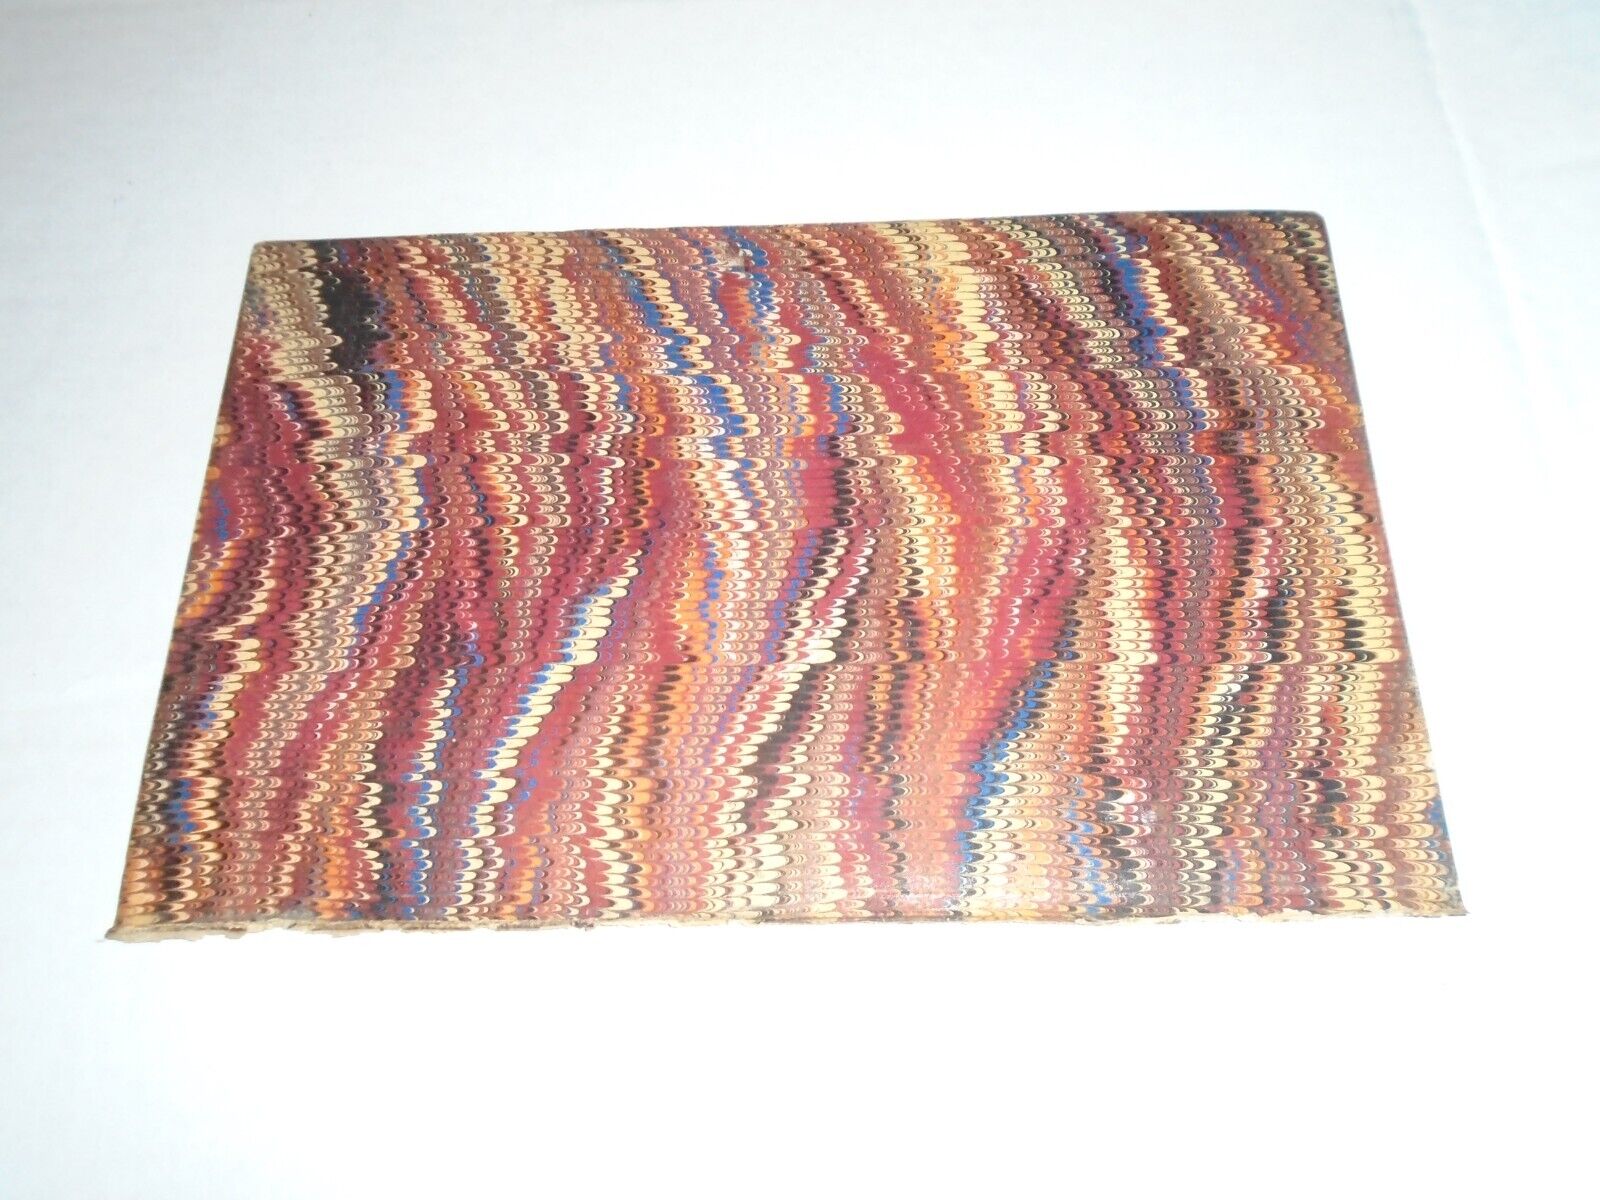 Antique Marbled Endpapers from Antique c.1800s Book, Book Repair/Art/Crafts 9